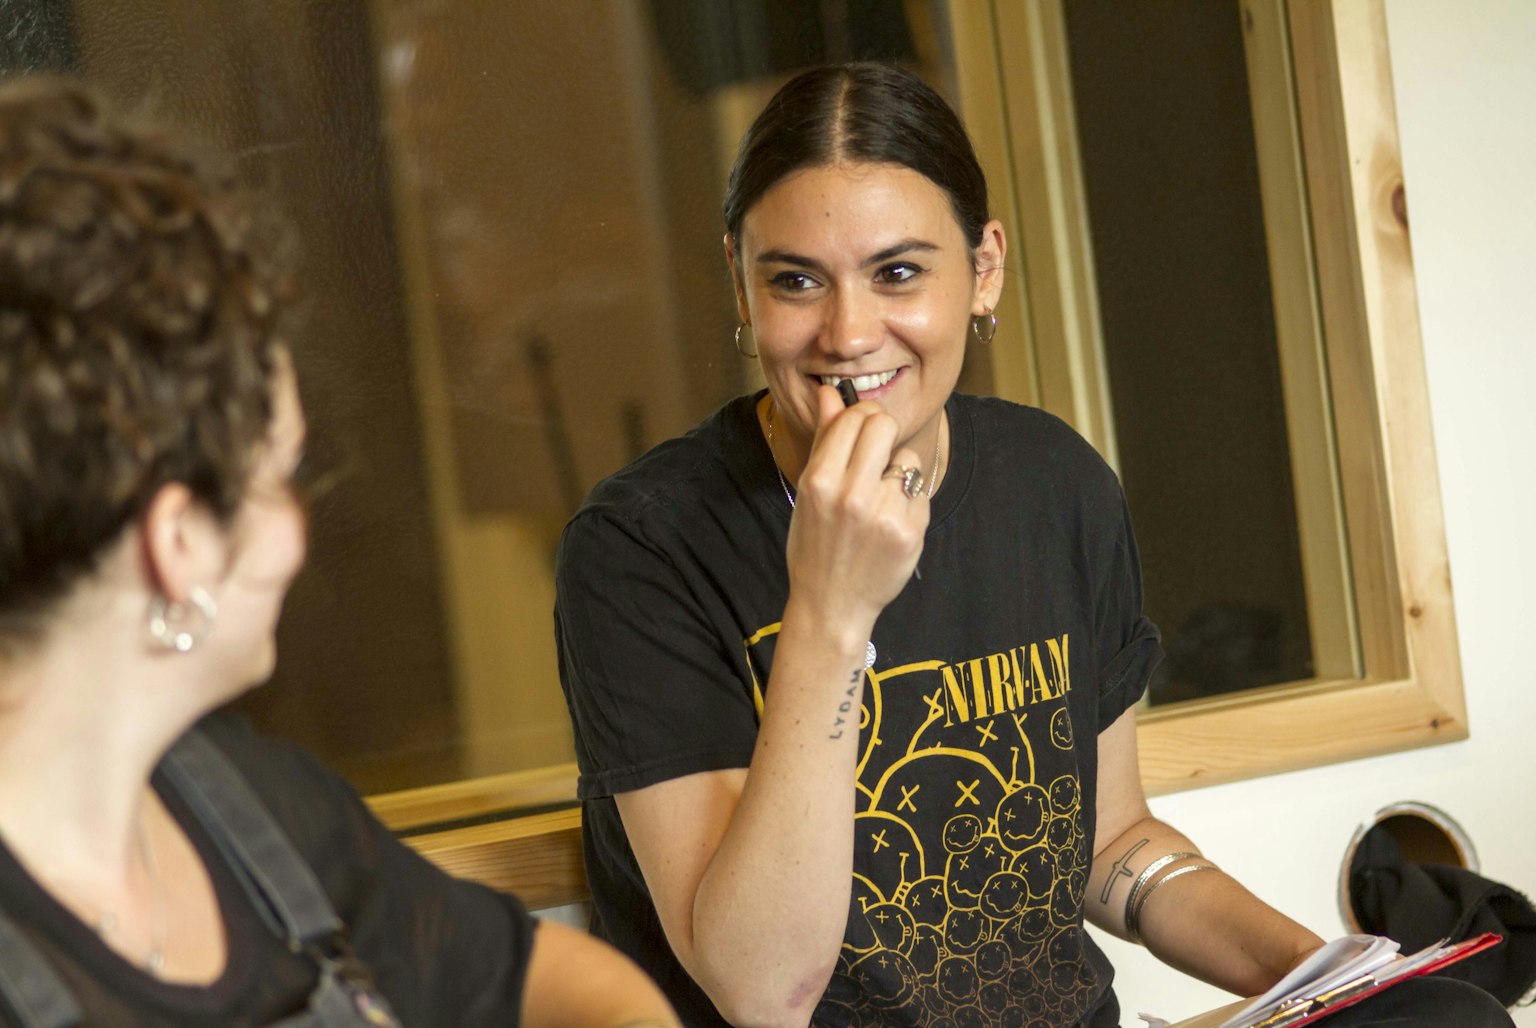 The artist Nadine Shah is smiling at a participant. Nadine is wearing a black Nirvana t-shirt. They are both sitting down in front of a window. 